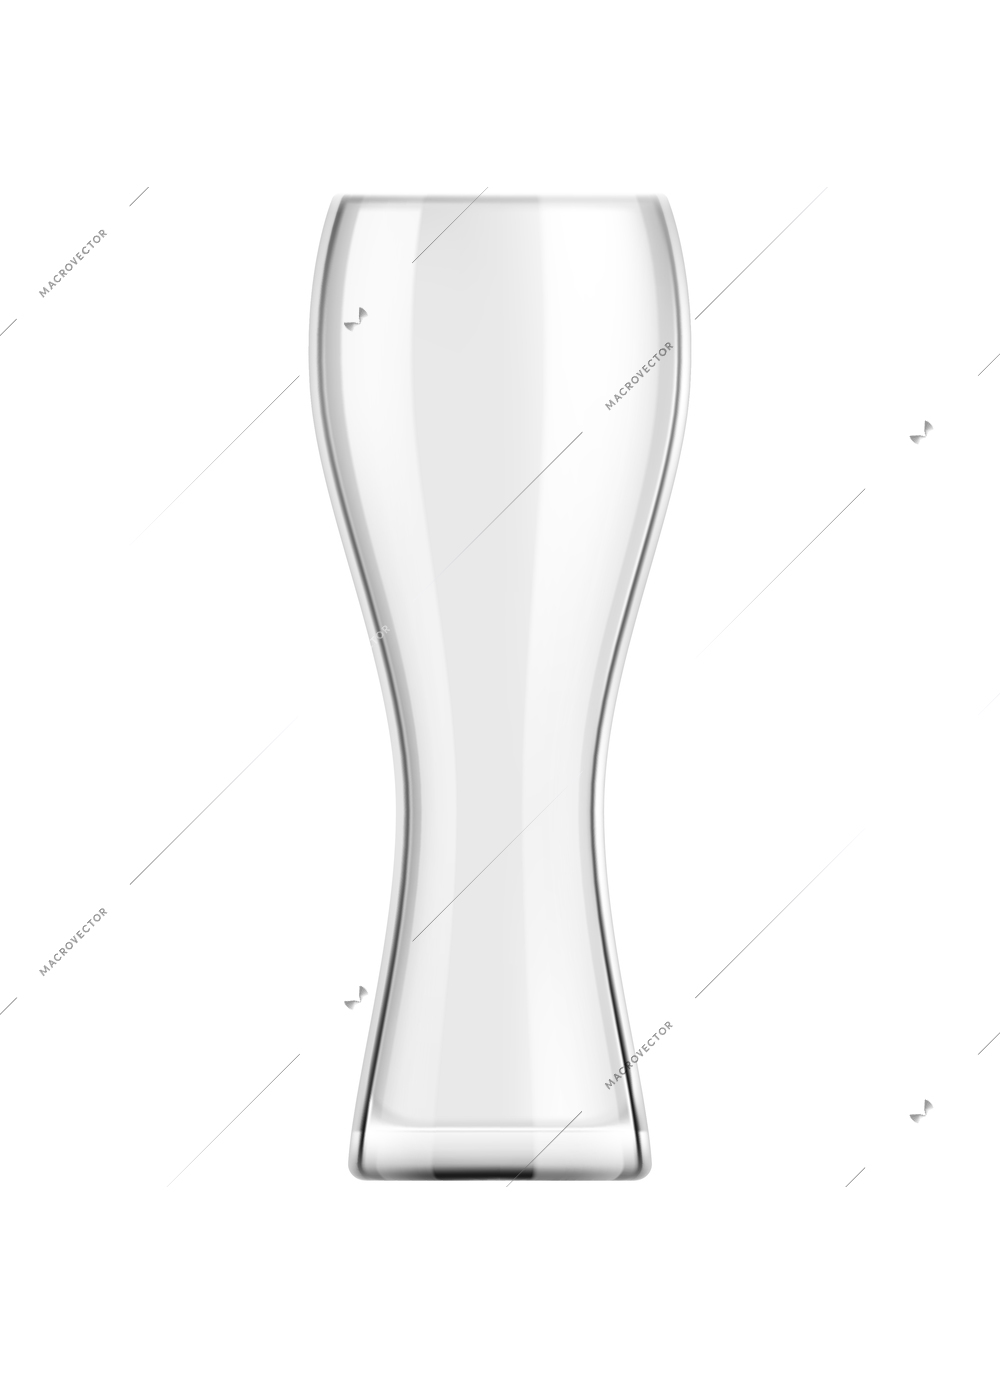 Beer realistic composition with view of tall glass empty on blank background vector illustration